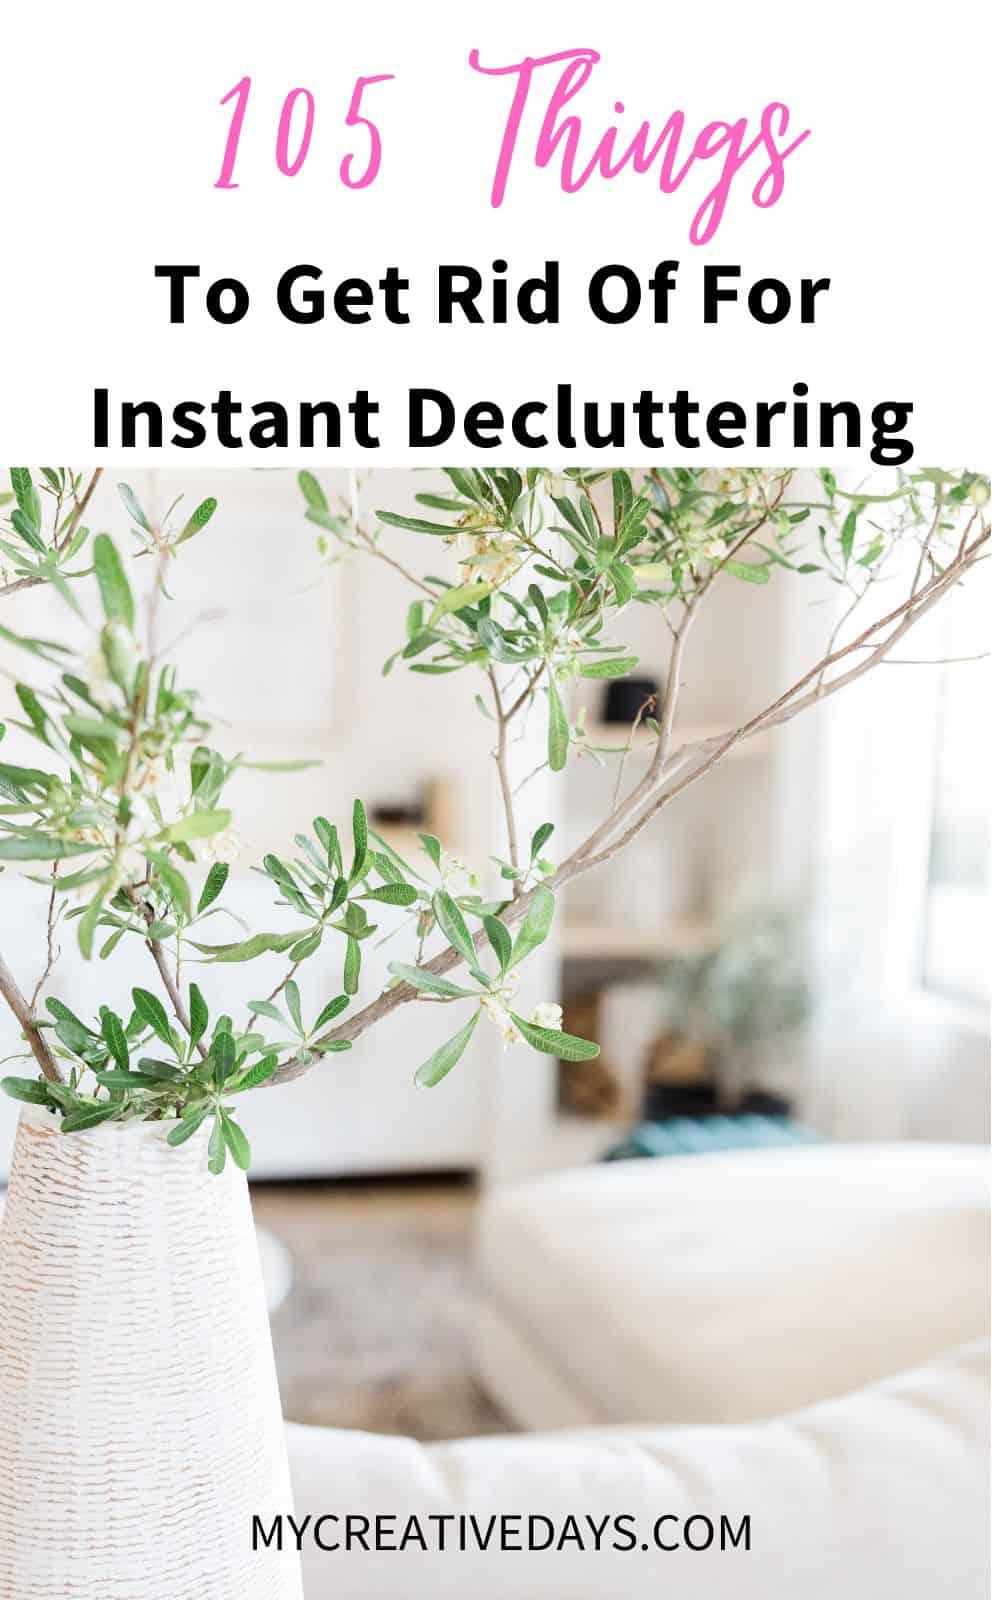 Getting organized can be overwhelming but this post will help. These 105 Things To Get Rid Of For Instant Decluttering will make it easier.